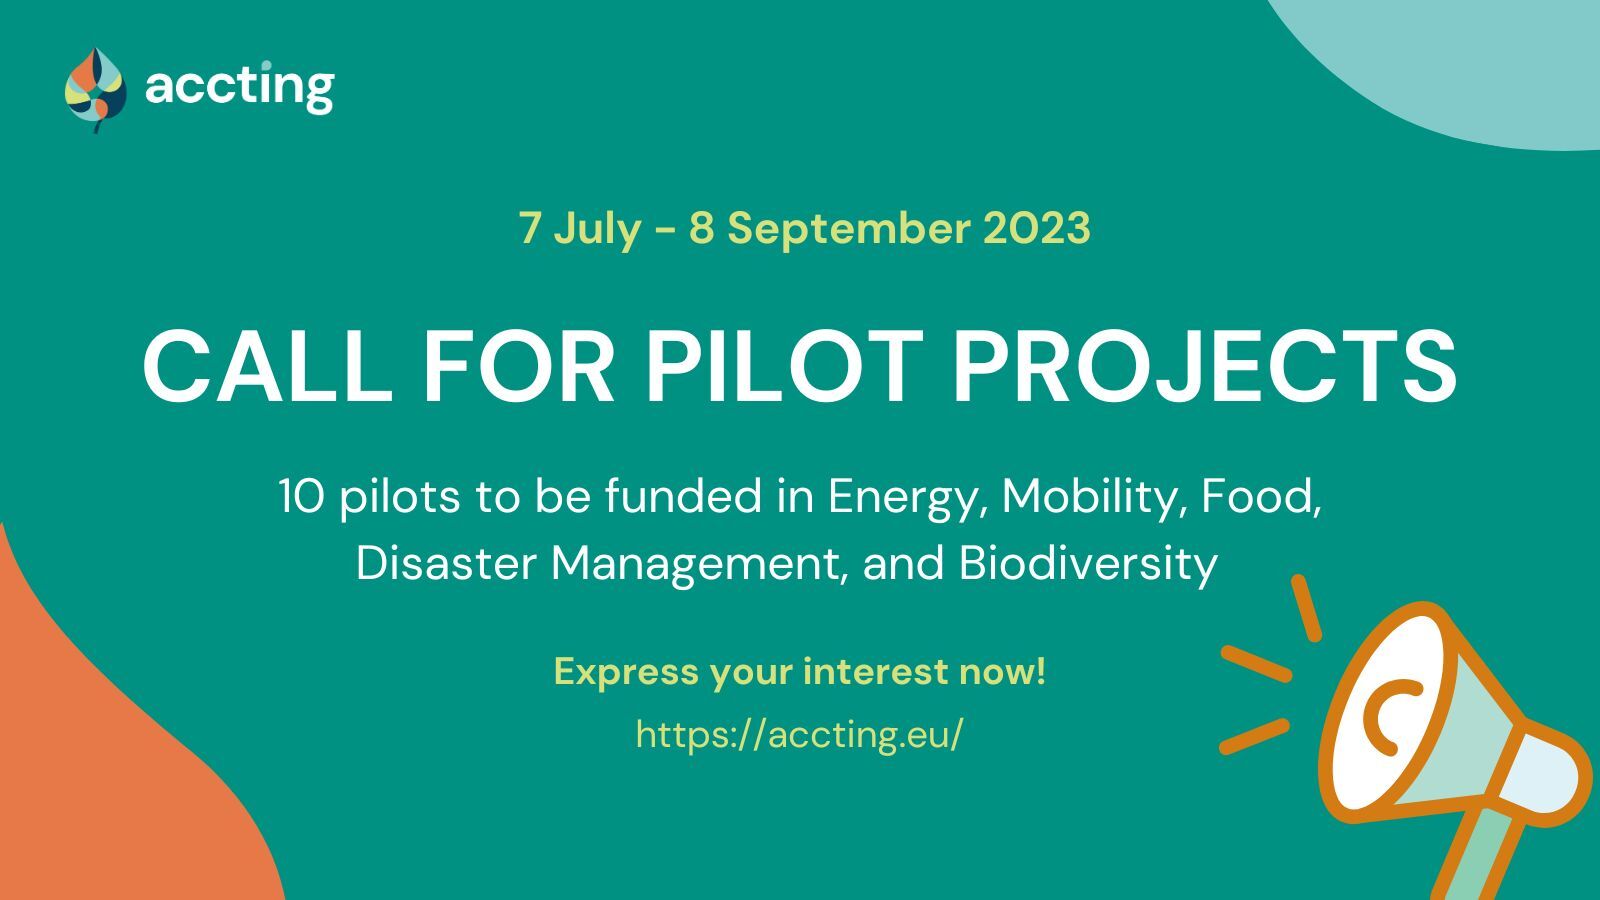 ACCTING project to fund 10 pilot projects in Energy, Mobility, Food, Disaster Management, or Biodiversity